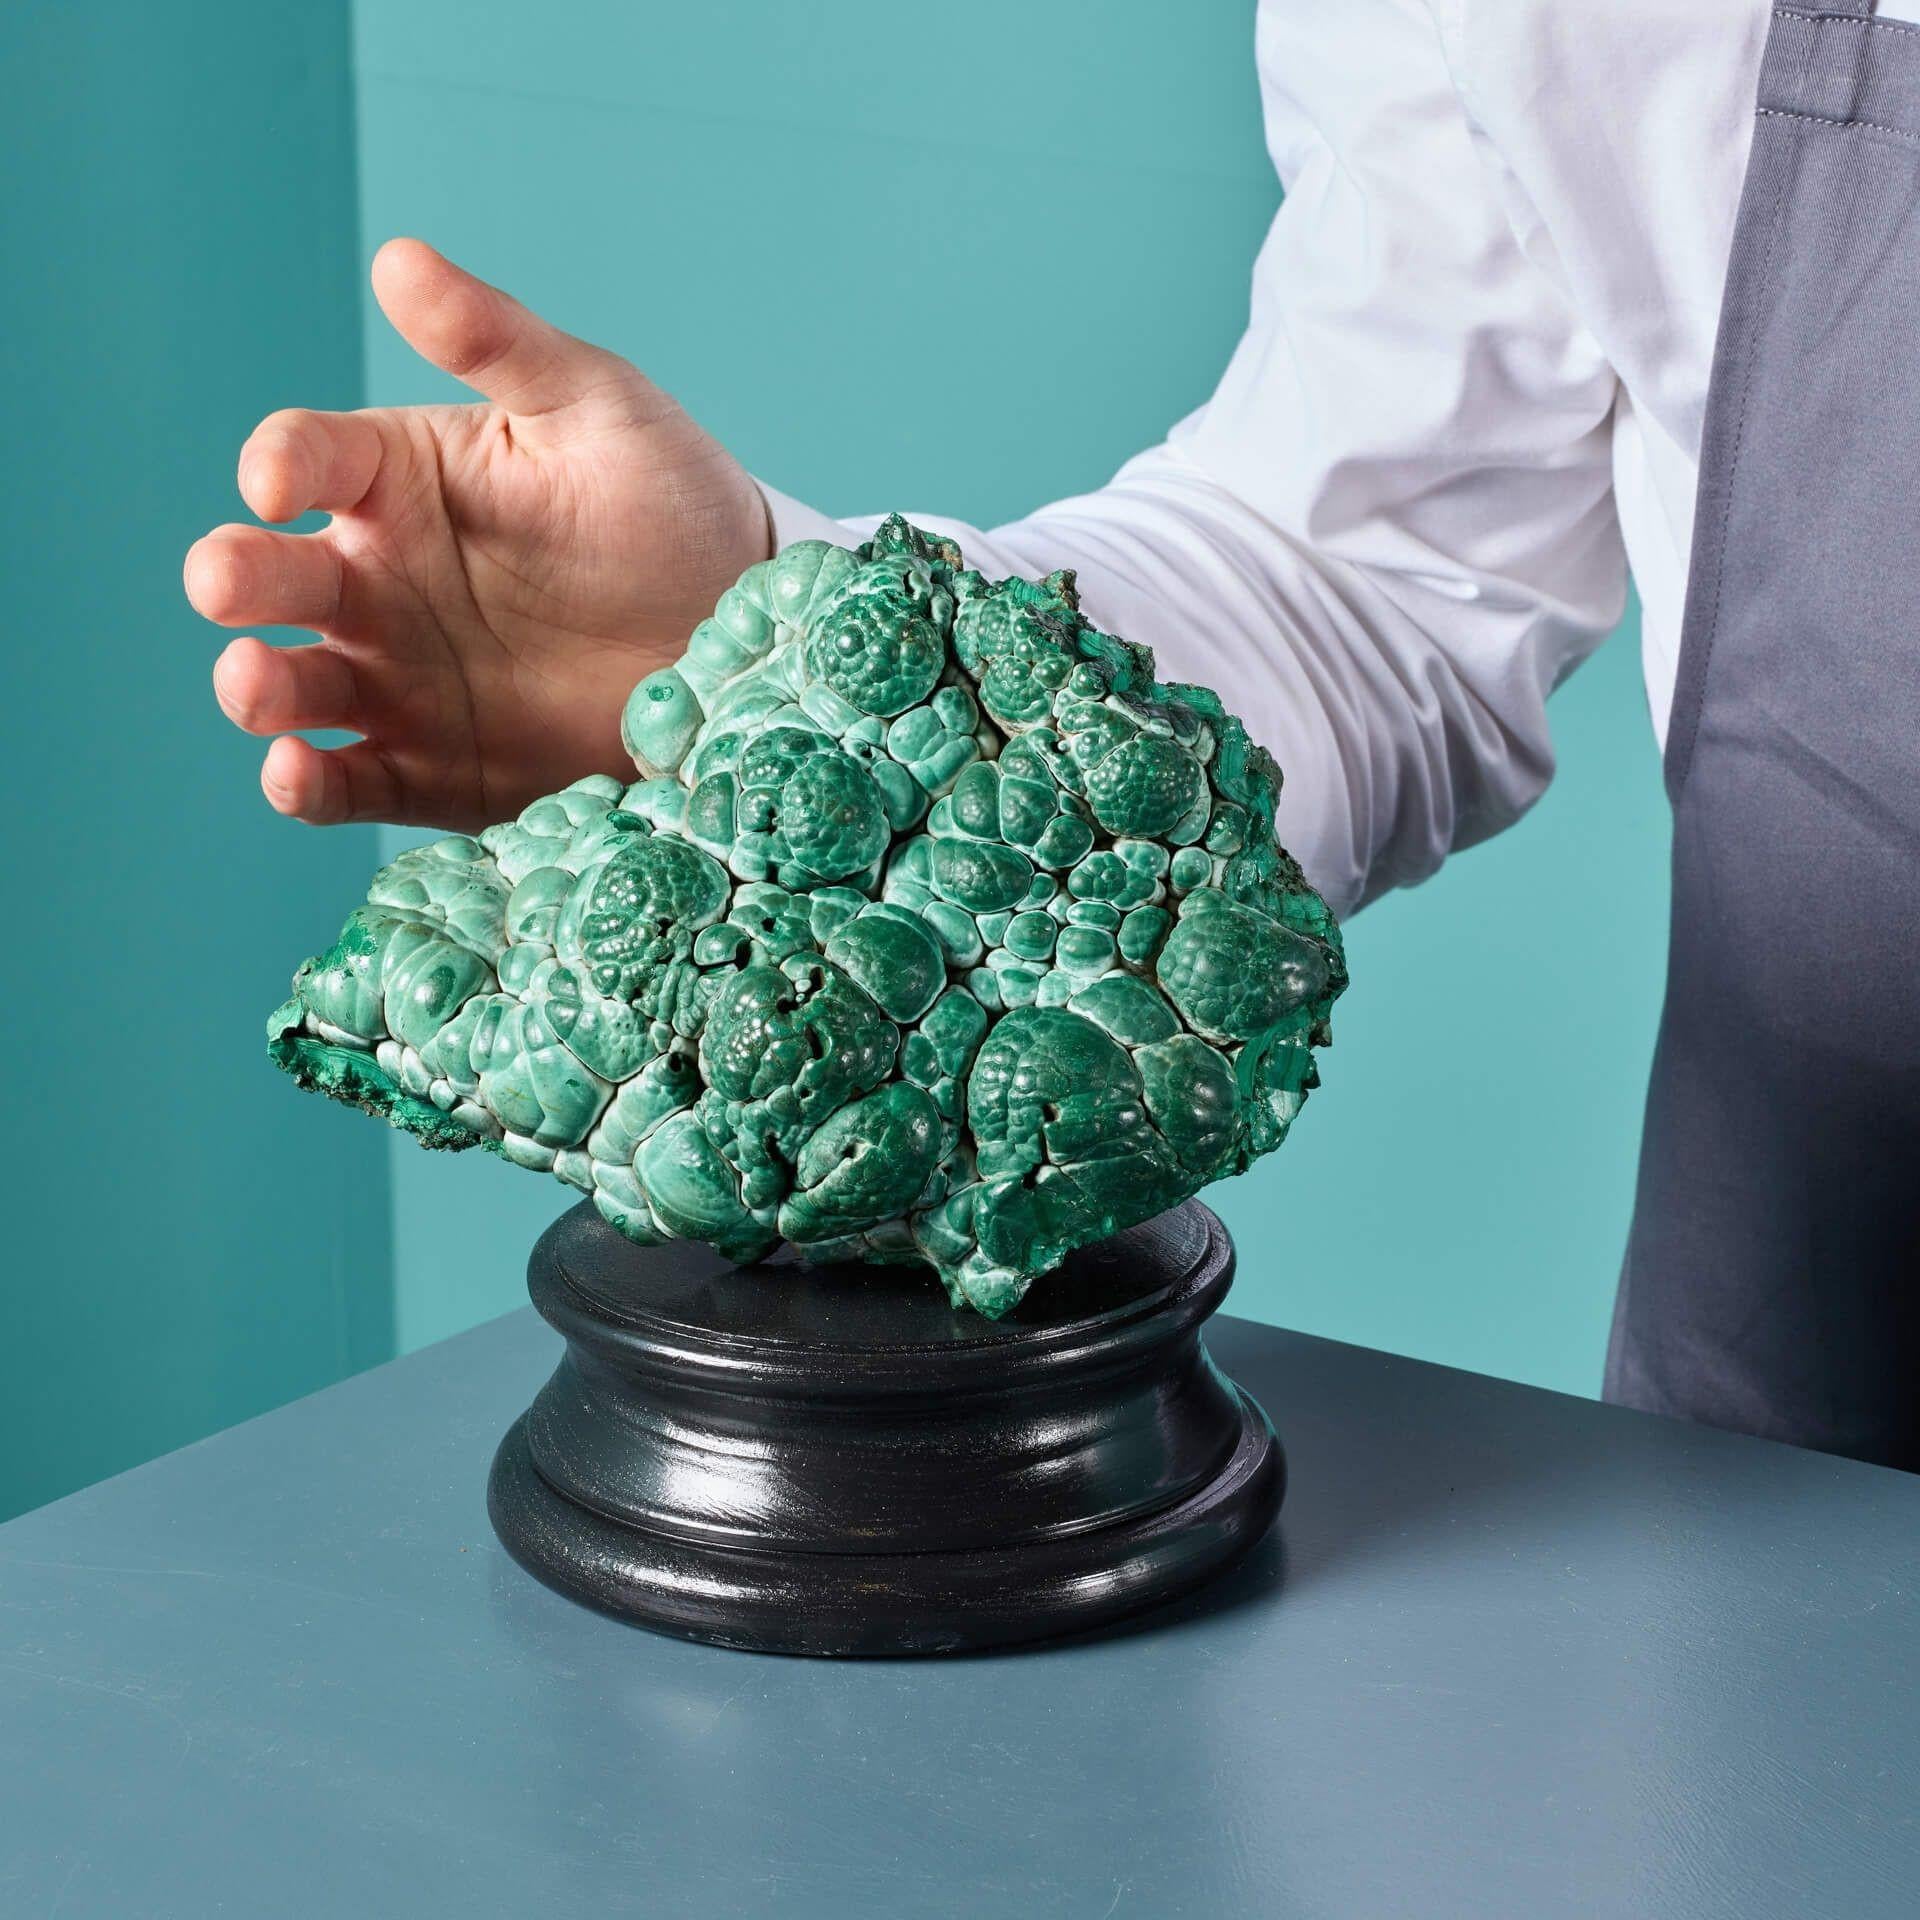 A large botryoidal green malachite specimen from Kolwezi, Congo, presented on an exclusive museum-quality painted plaster display plinth.

Named for its distinctive form resembling a cauliflower texture, this vibrant green, copper-based mineral has